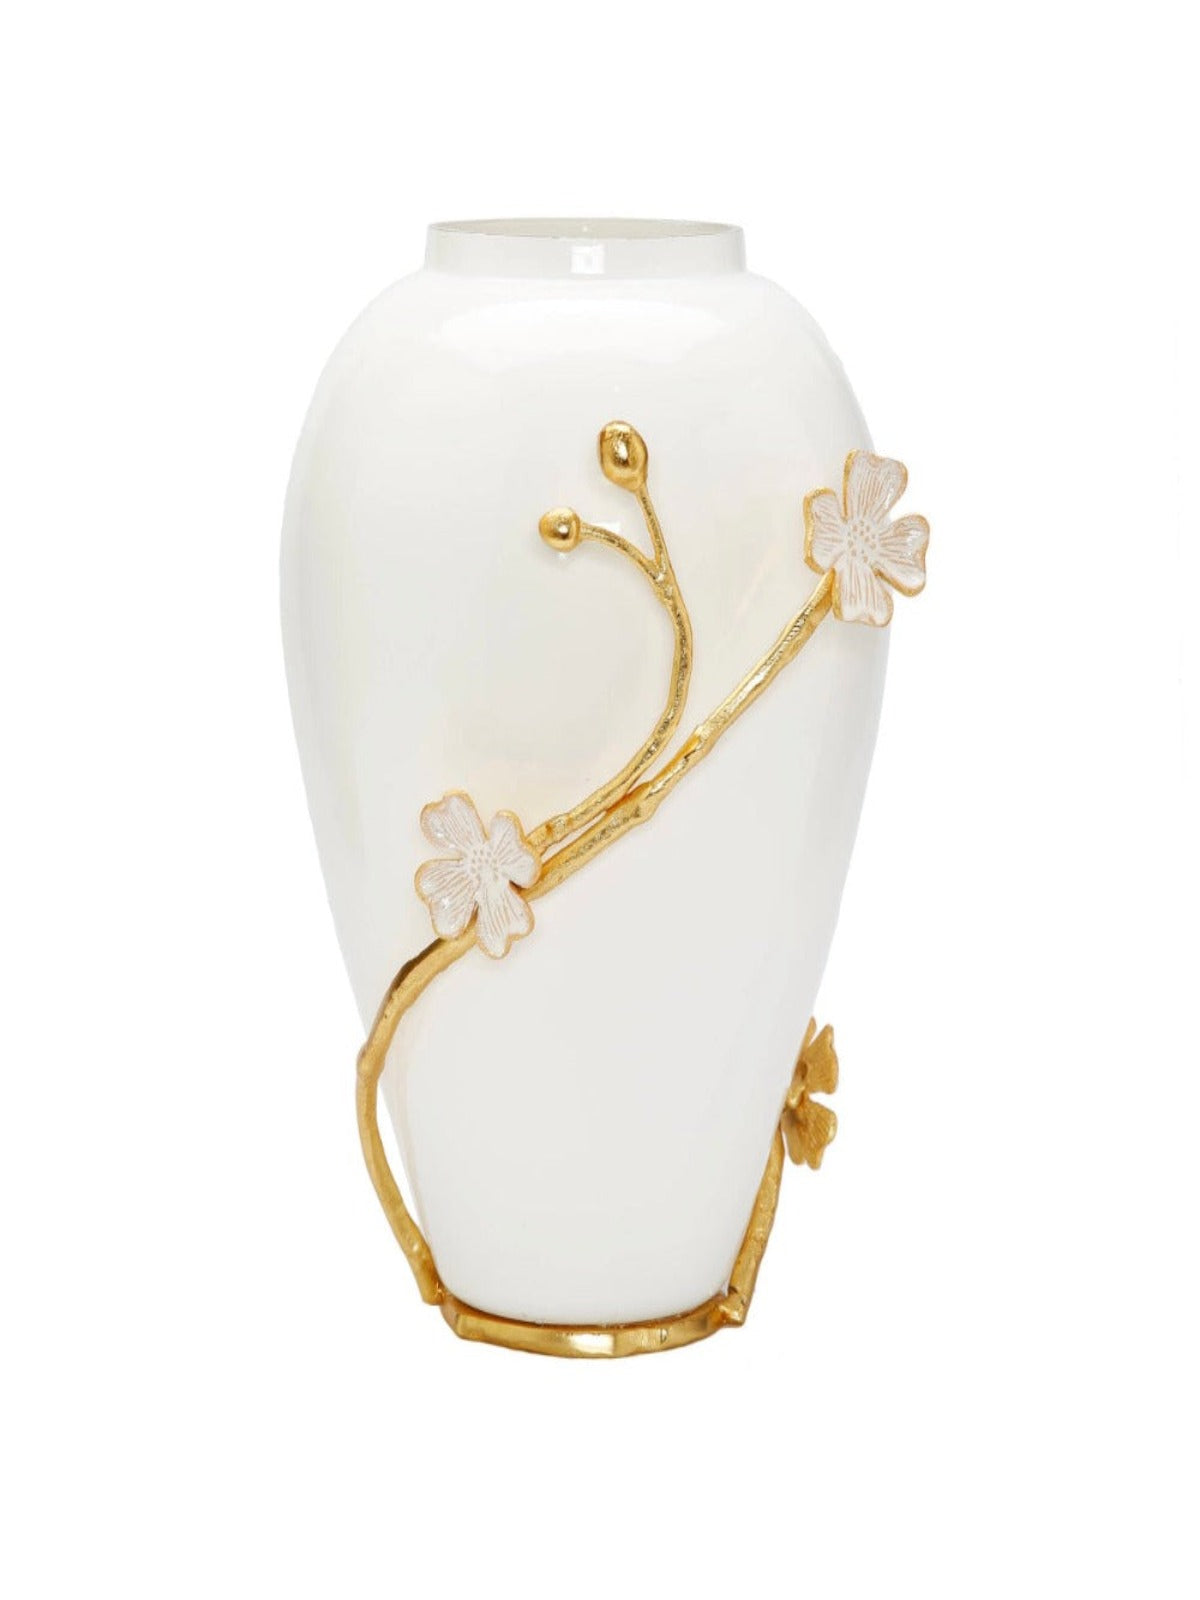 This 11H Cherry Blossom White Porcelain Vase is designed with gold branches and flowers surrounding its exterior.